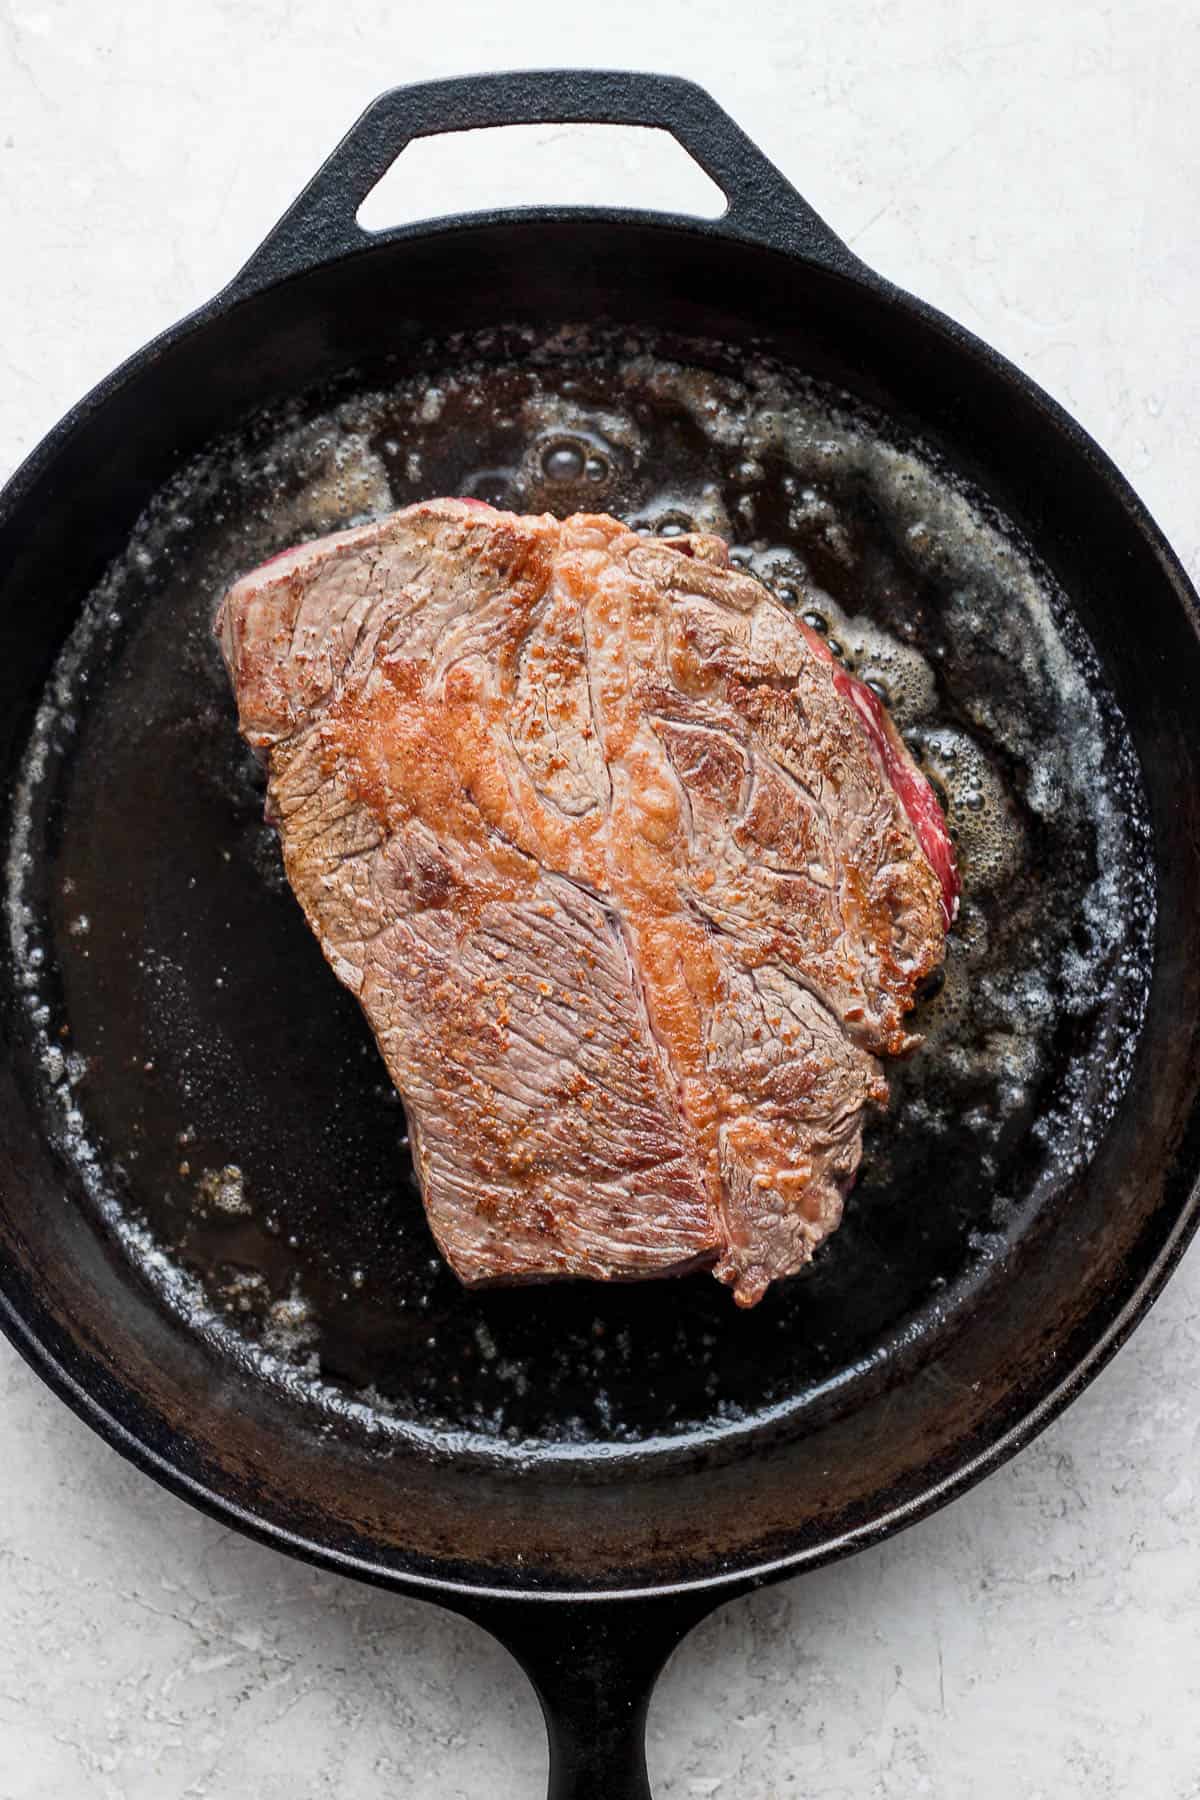 The seasoned chuck roast being seared in a cast iron skillet.